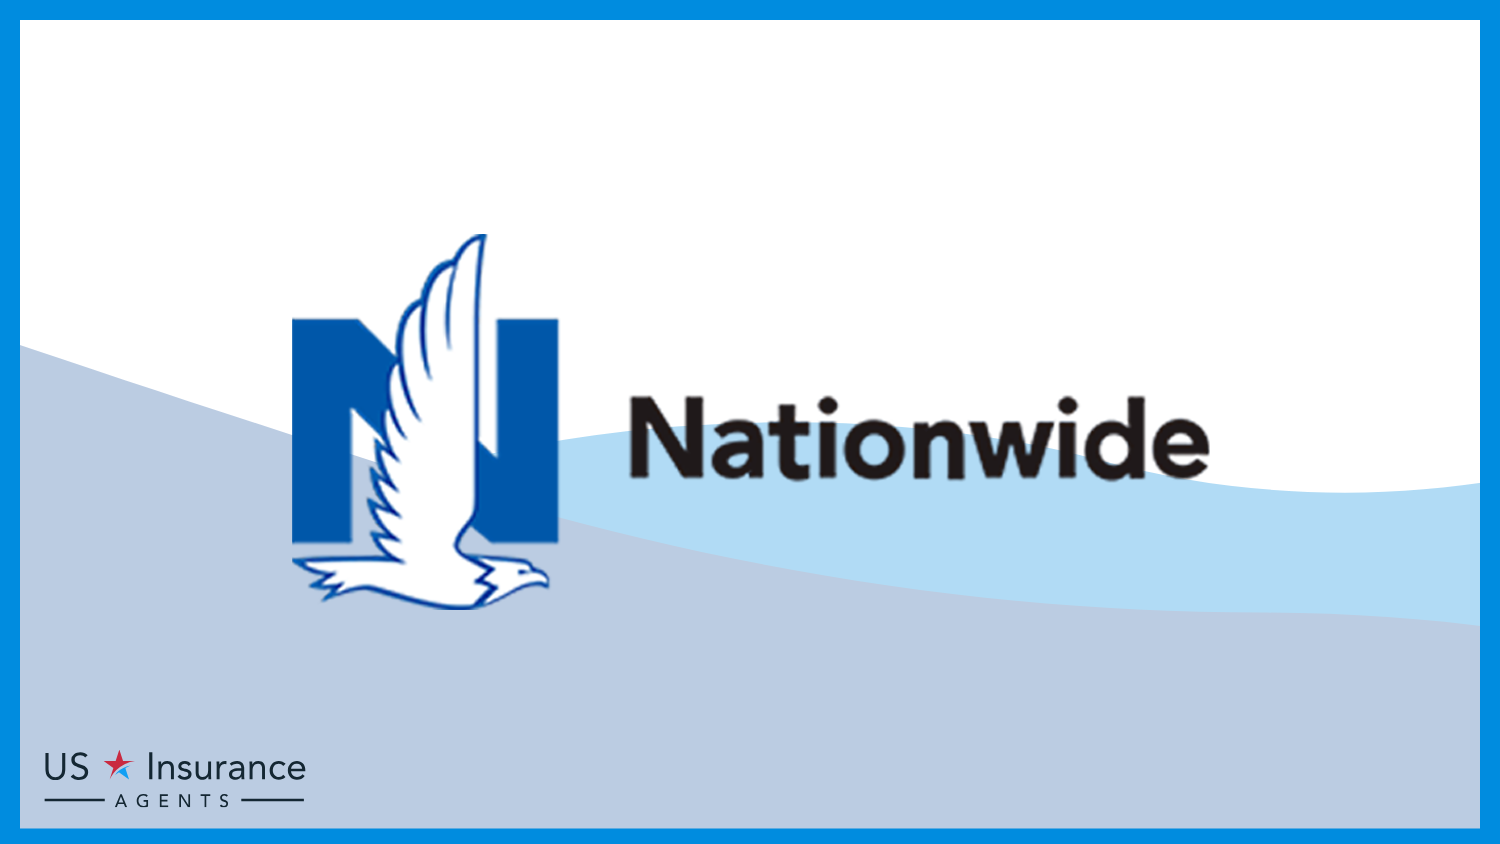 Nationwide: Best Life Insurance for Missionaries